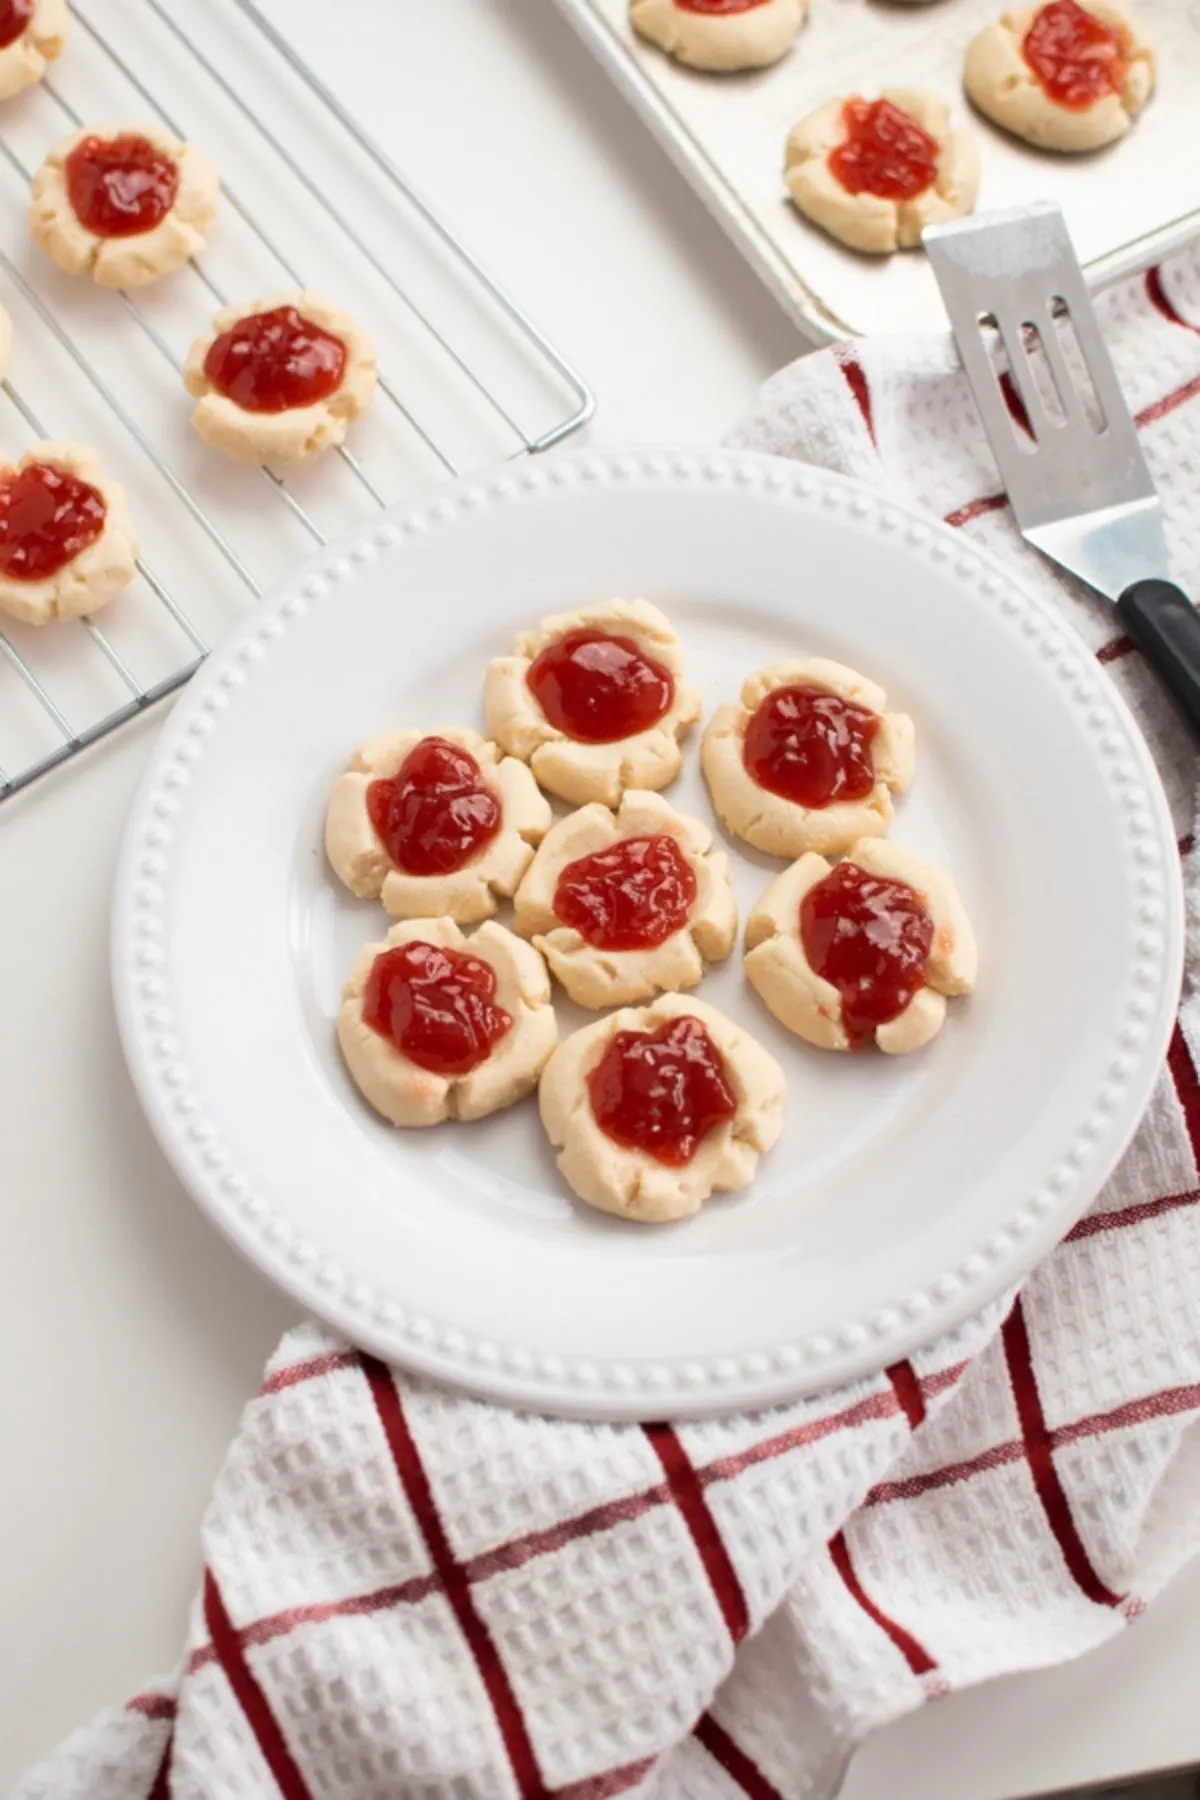 Thumbprint cookies on a white plate, cooling rack and metal baking pan.